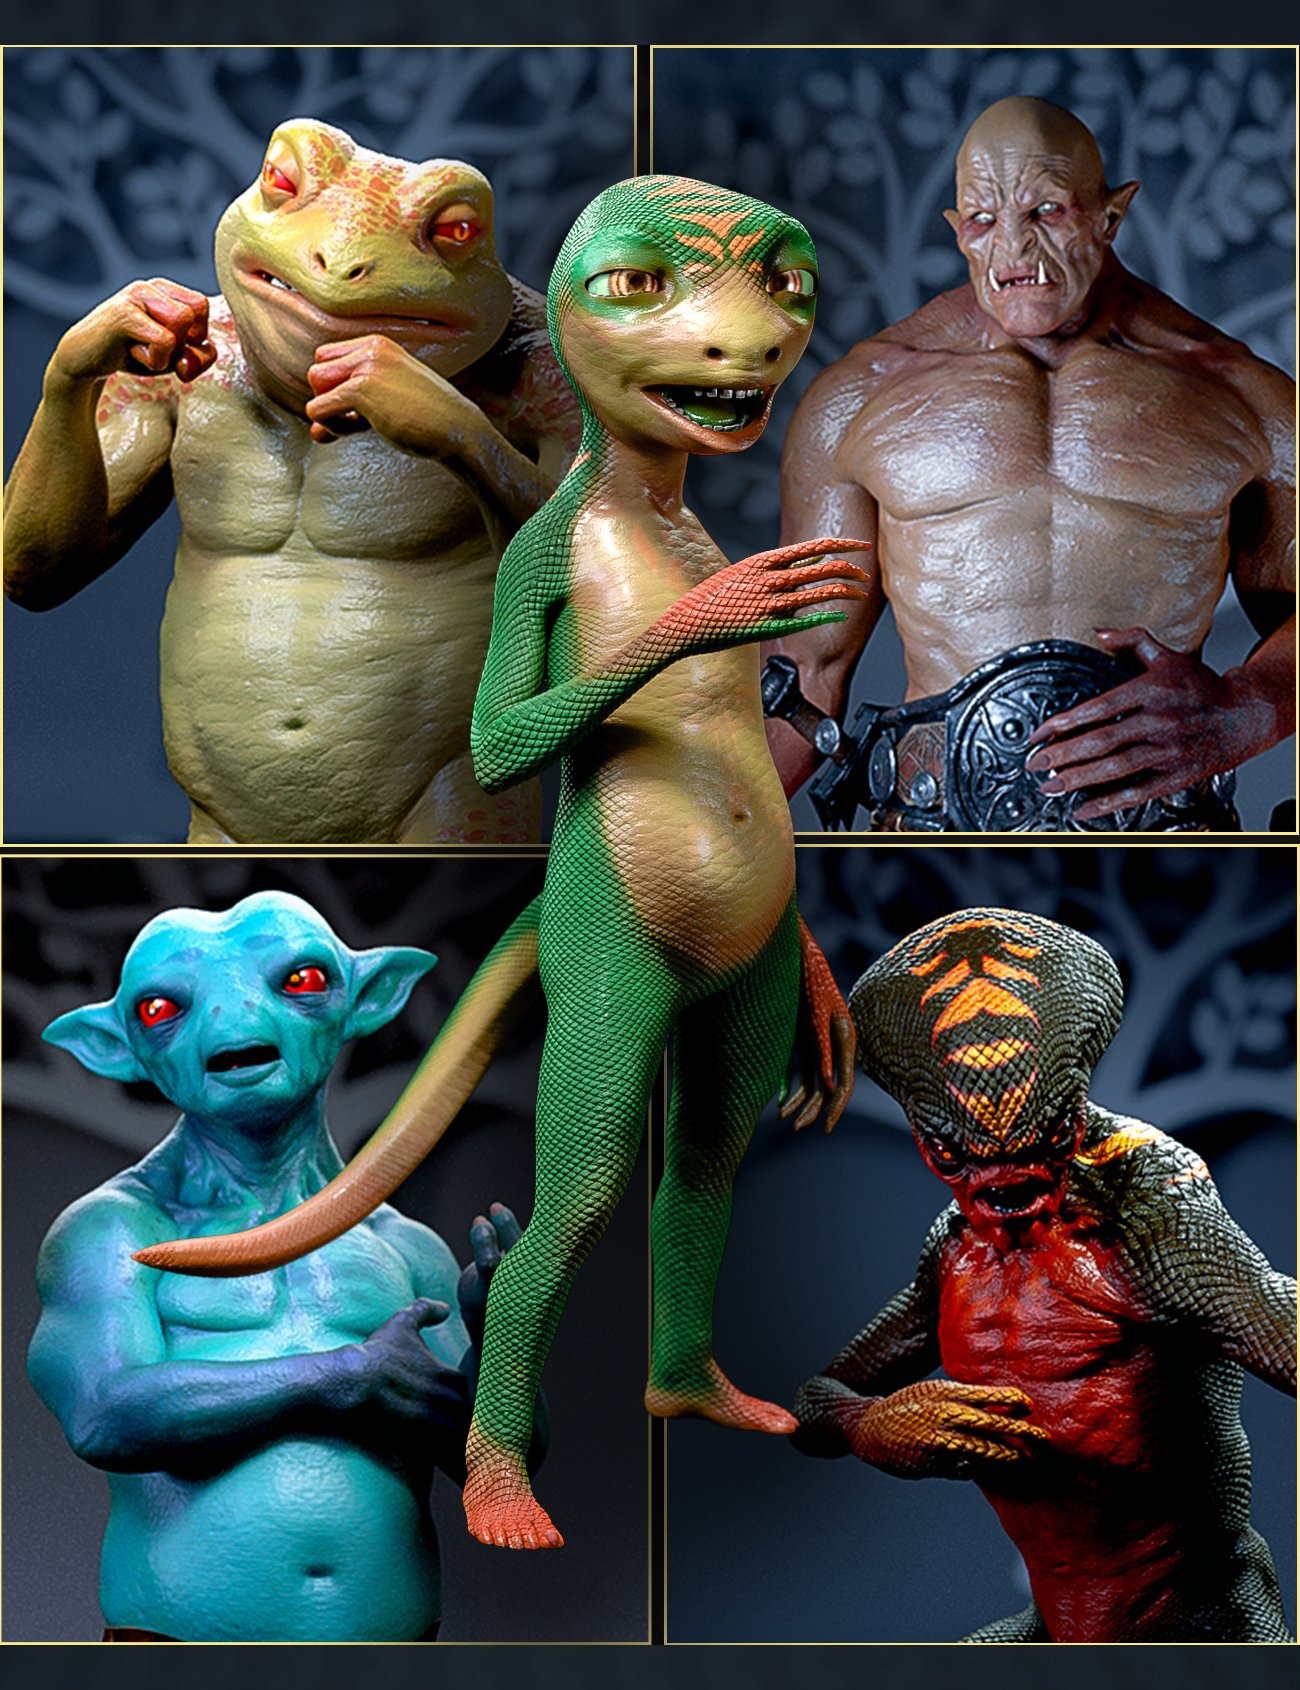 Alternate Textures for Oso Newt and Genesis 8.1 Males